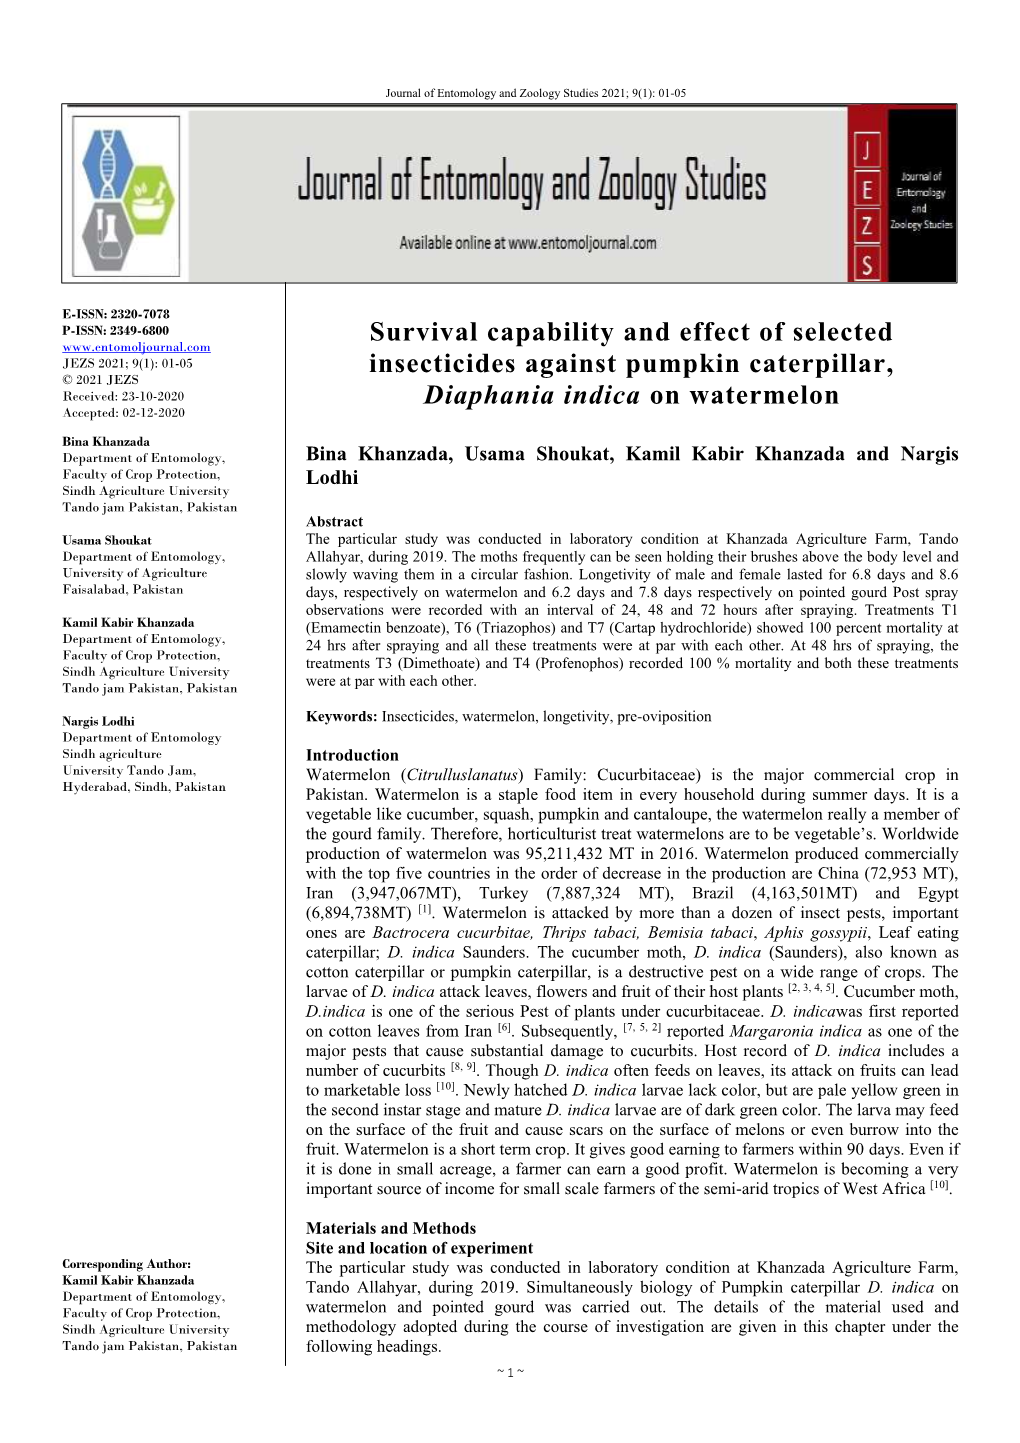 Survival Capability and Effect of Selected Insecticides Against